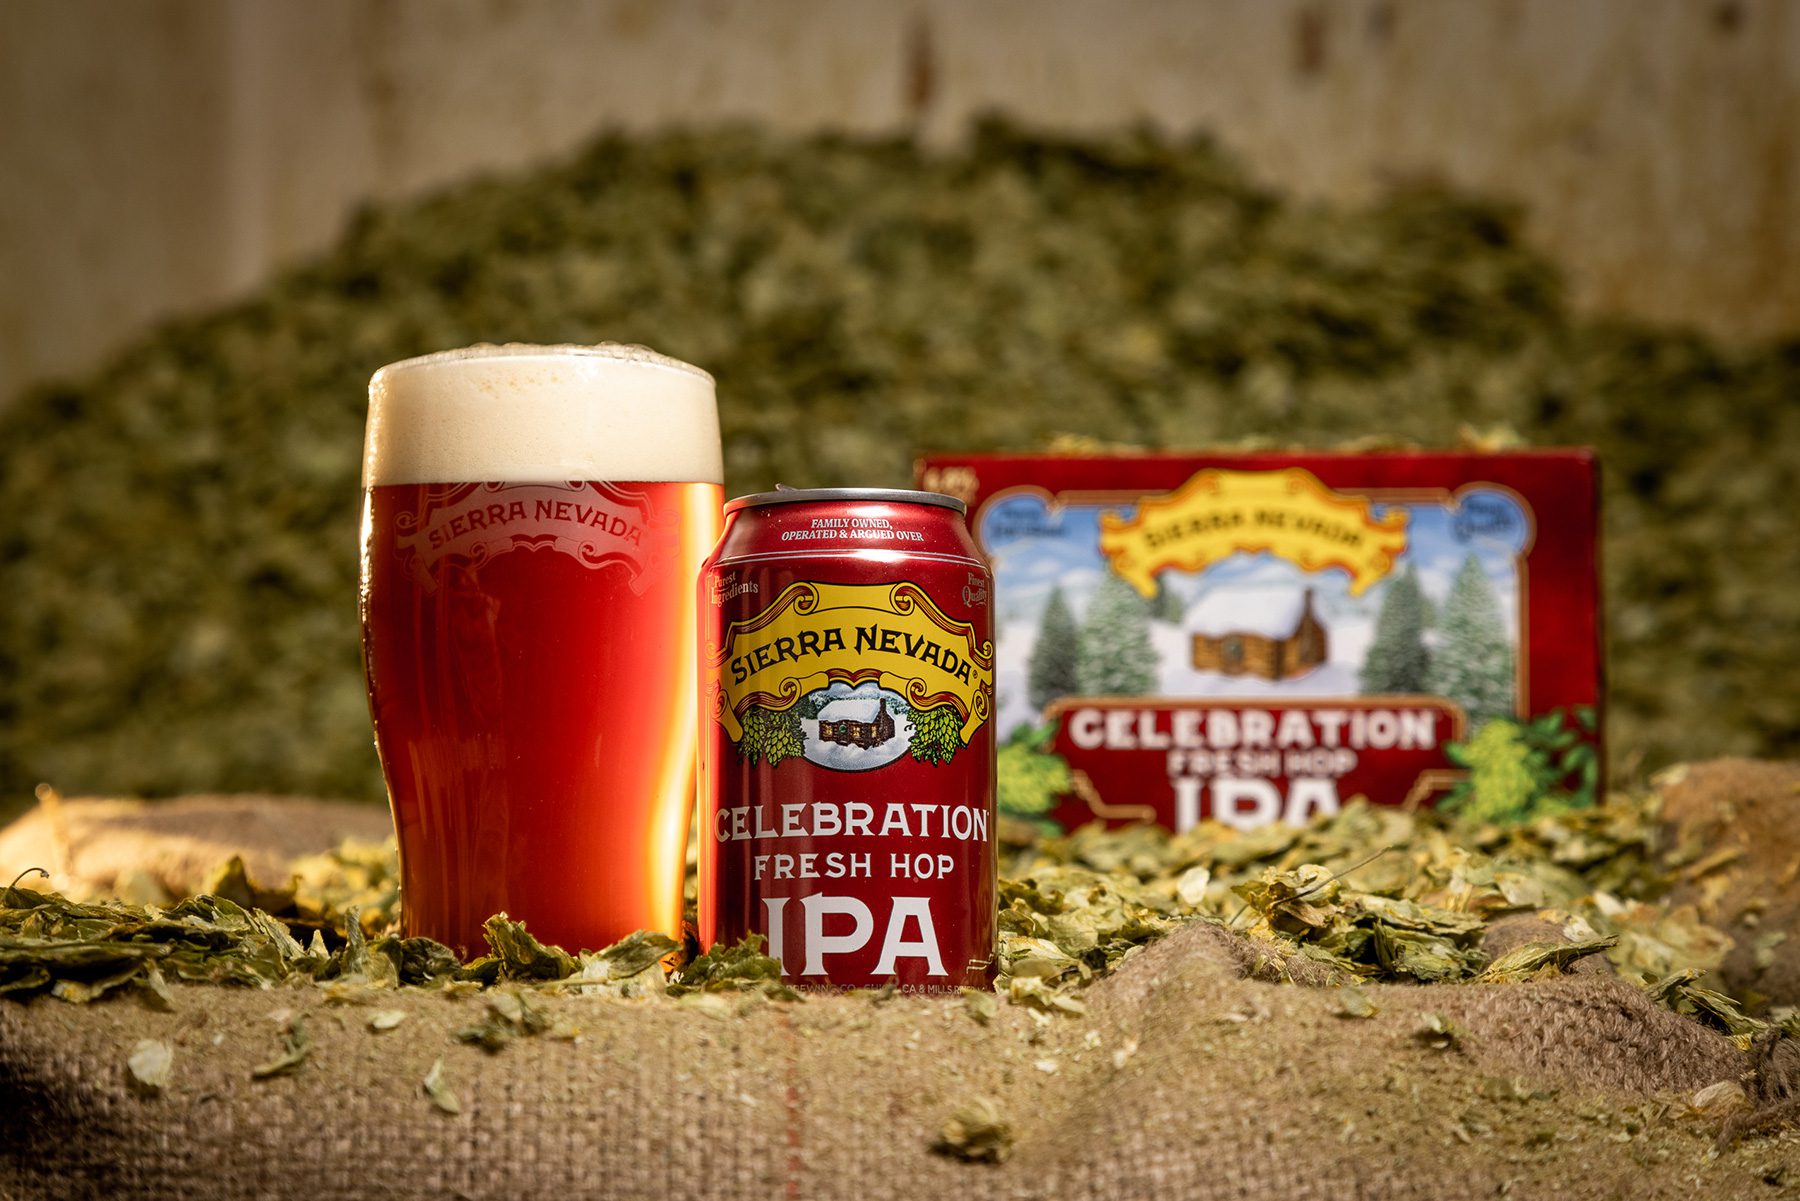 A can of Celebration IPA next to a full pint glass